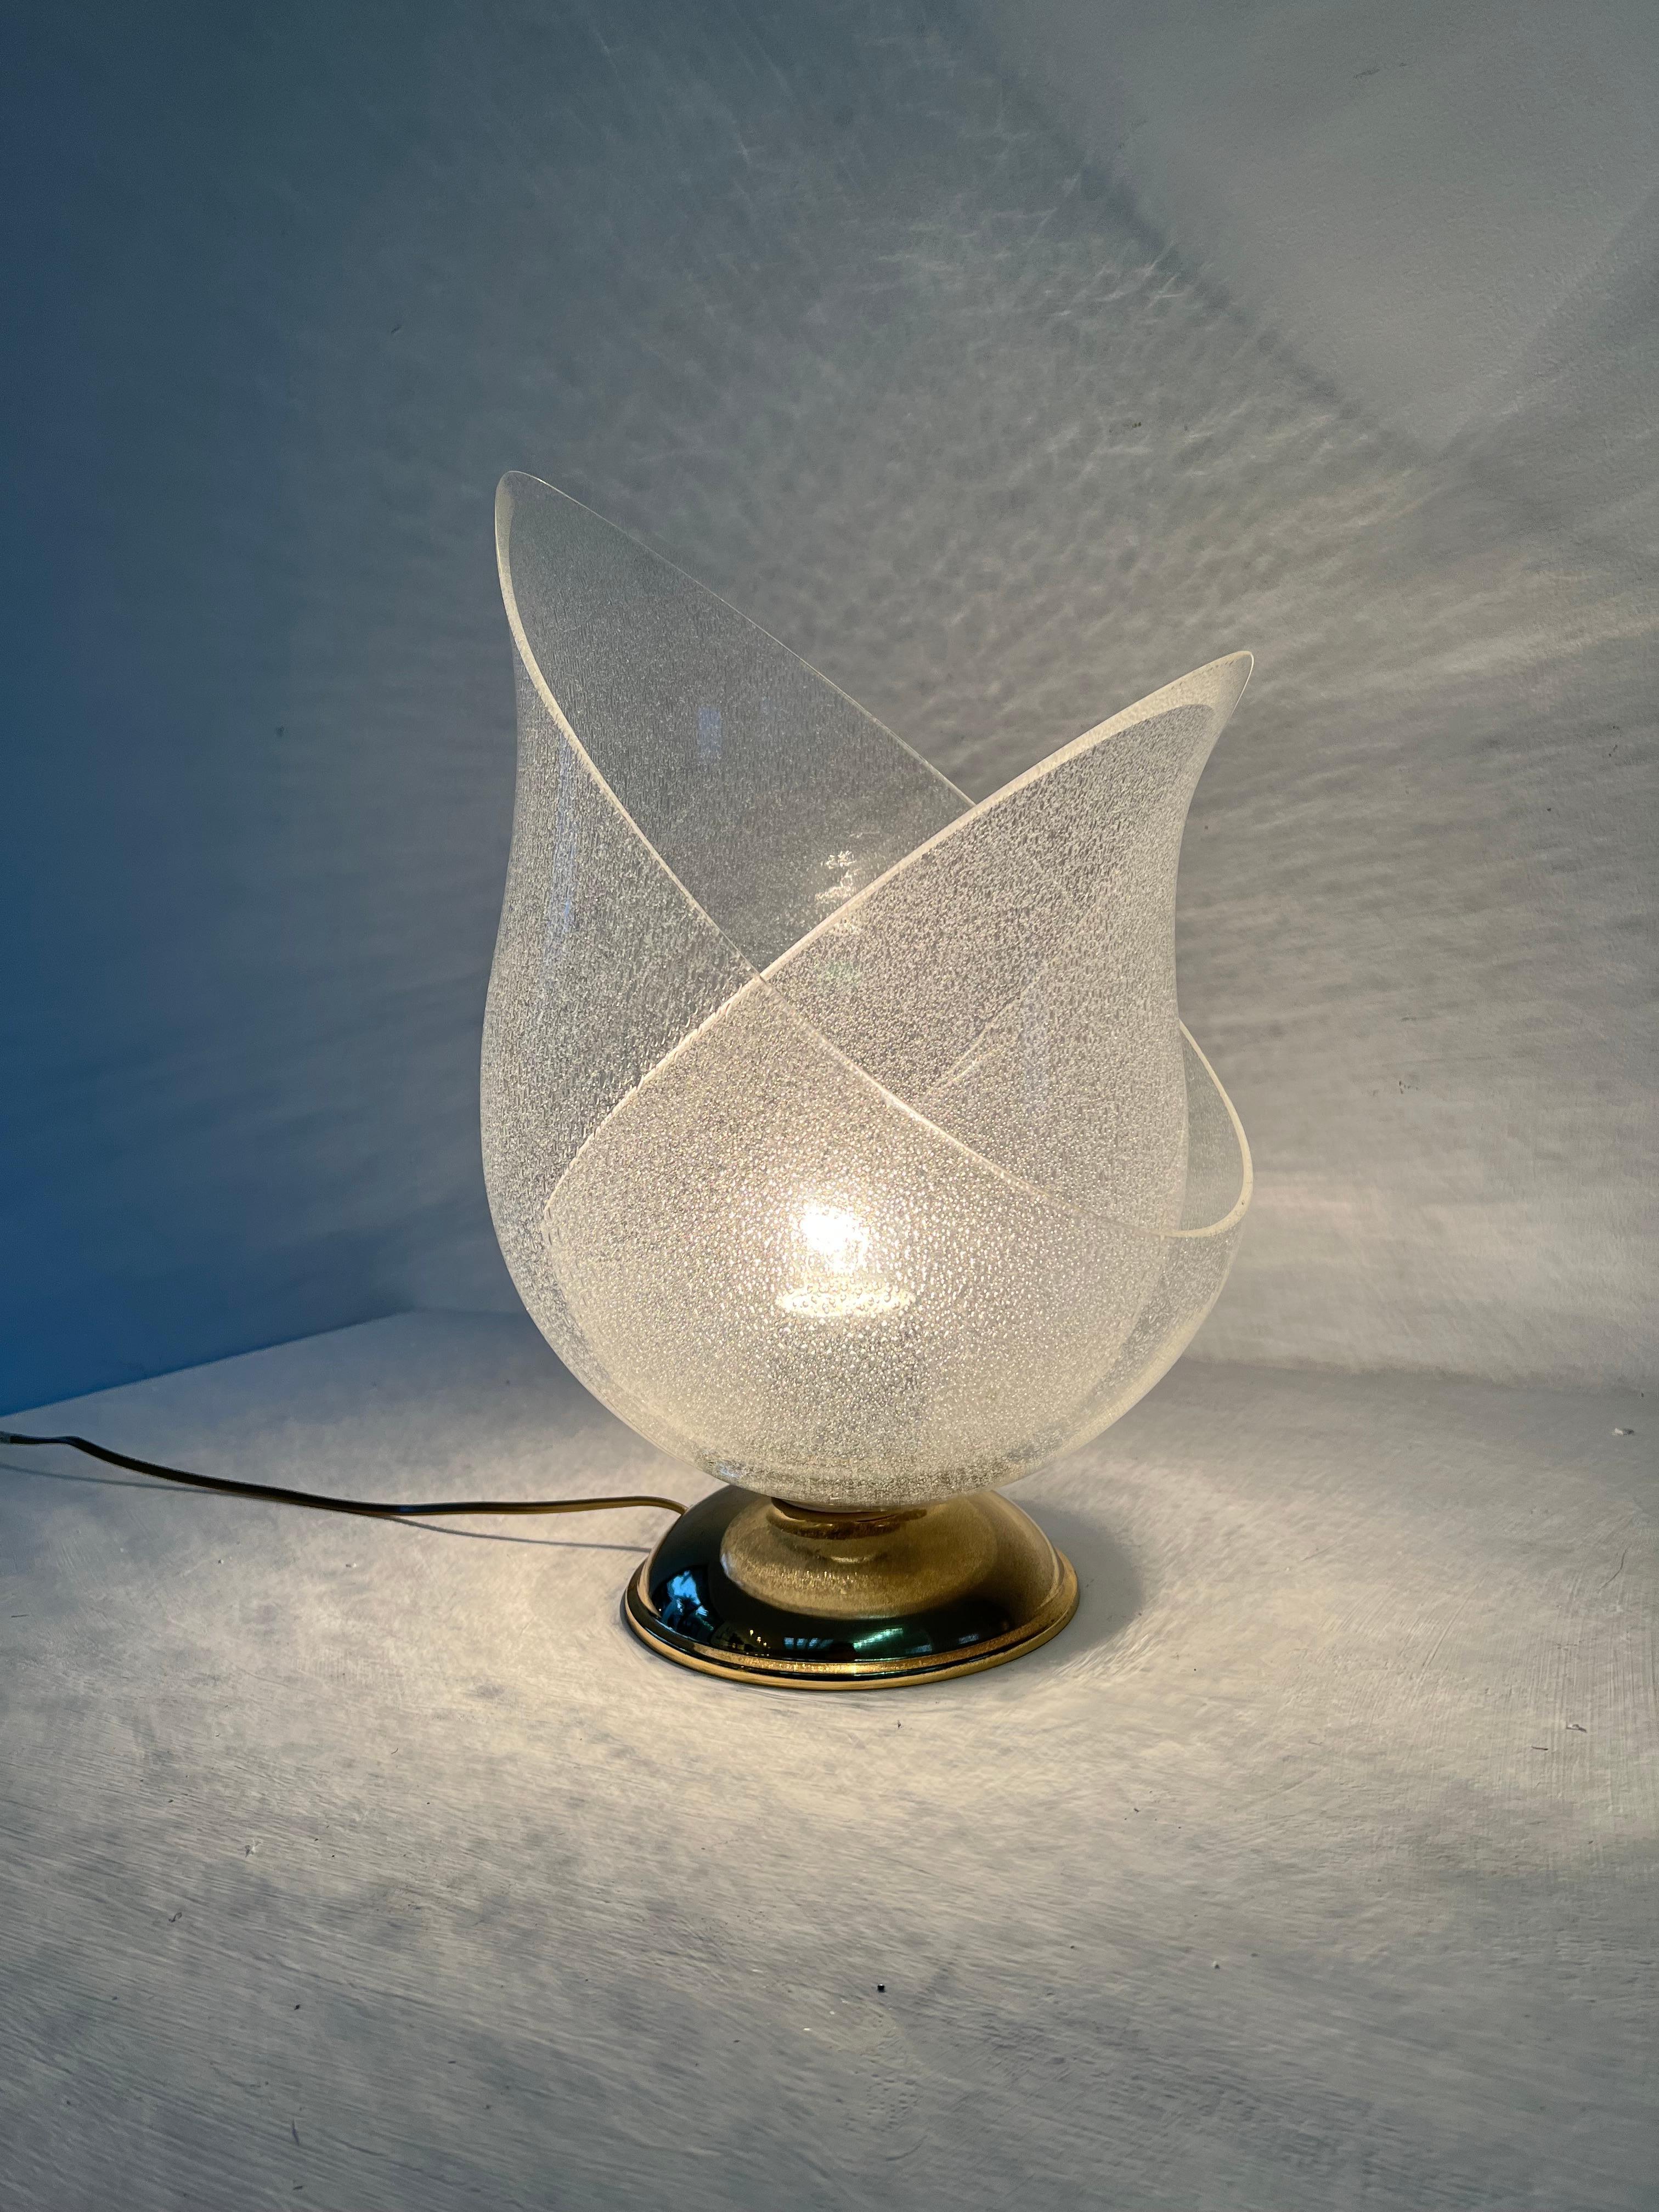 Blown Glass Mid-Century Modern Table Lamp by Carlo Nason for Mazzega in Murano Glass ca 1968 For Sale